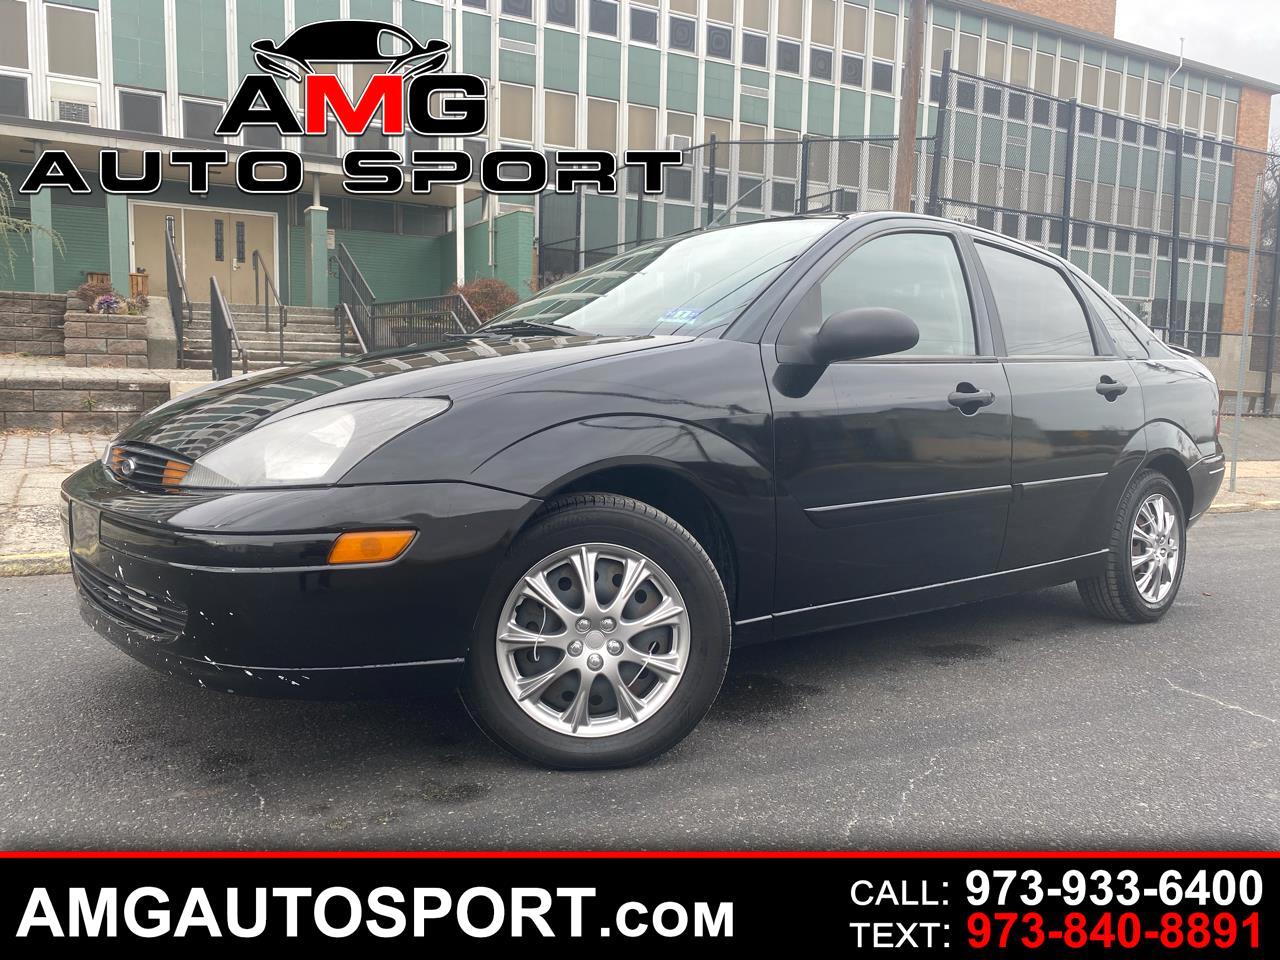 Used 2004 Ford Focus For Sale In Newark Nj 07104 Amg Auto Sport